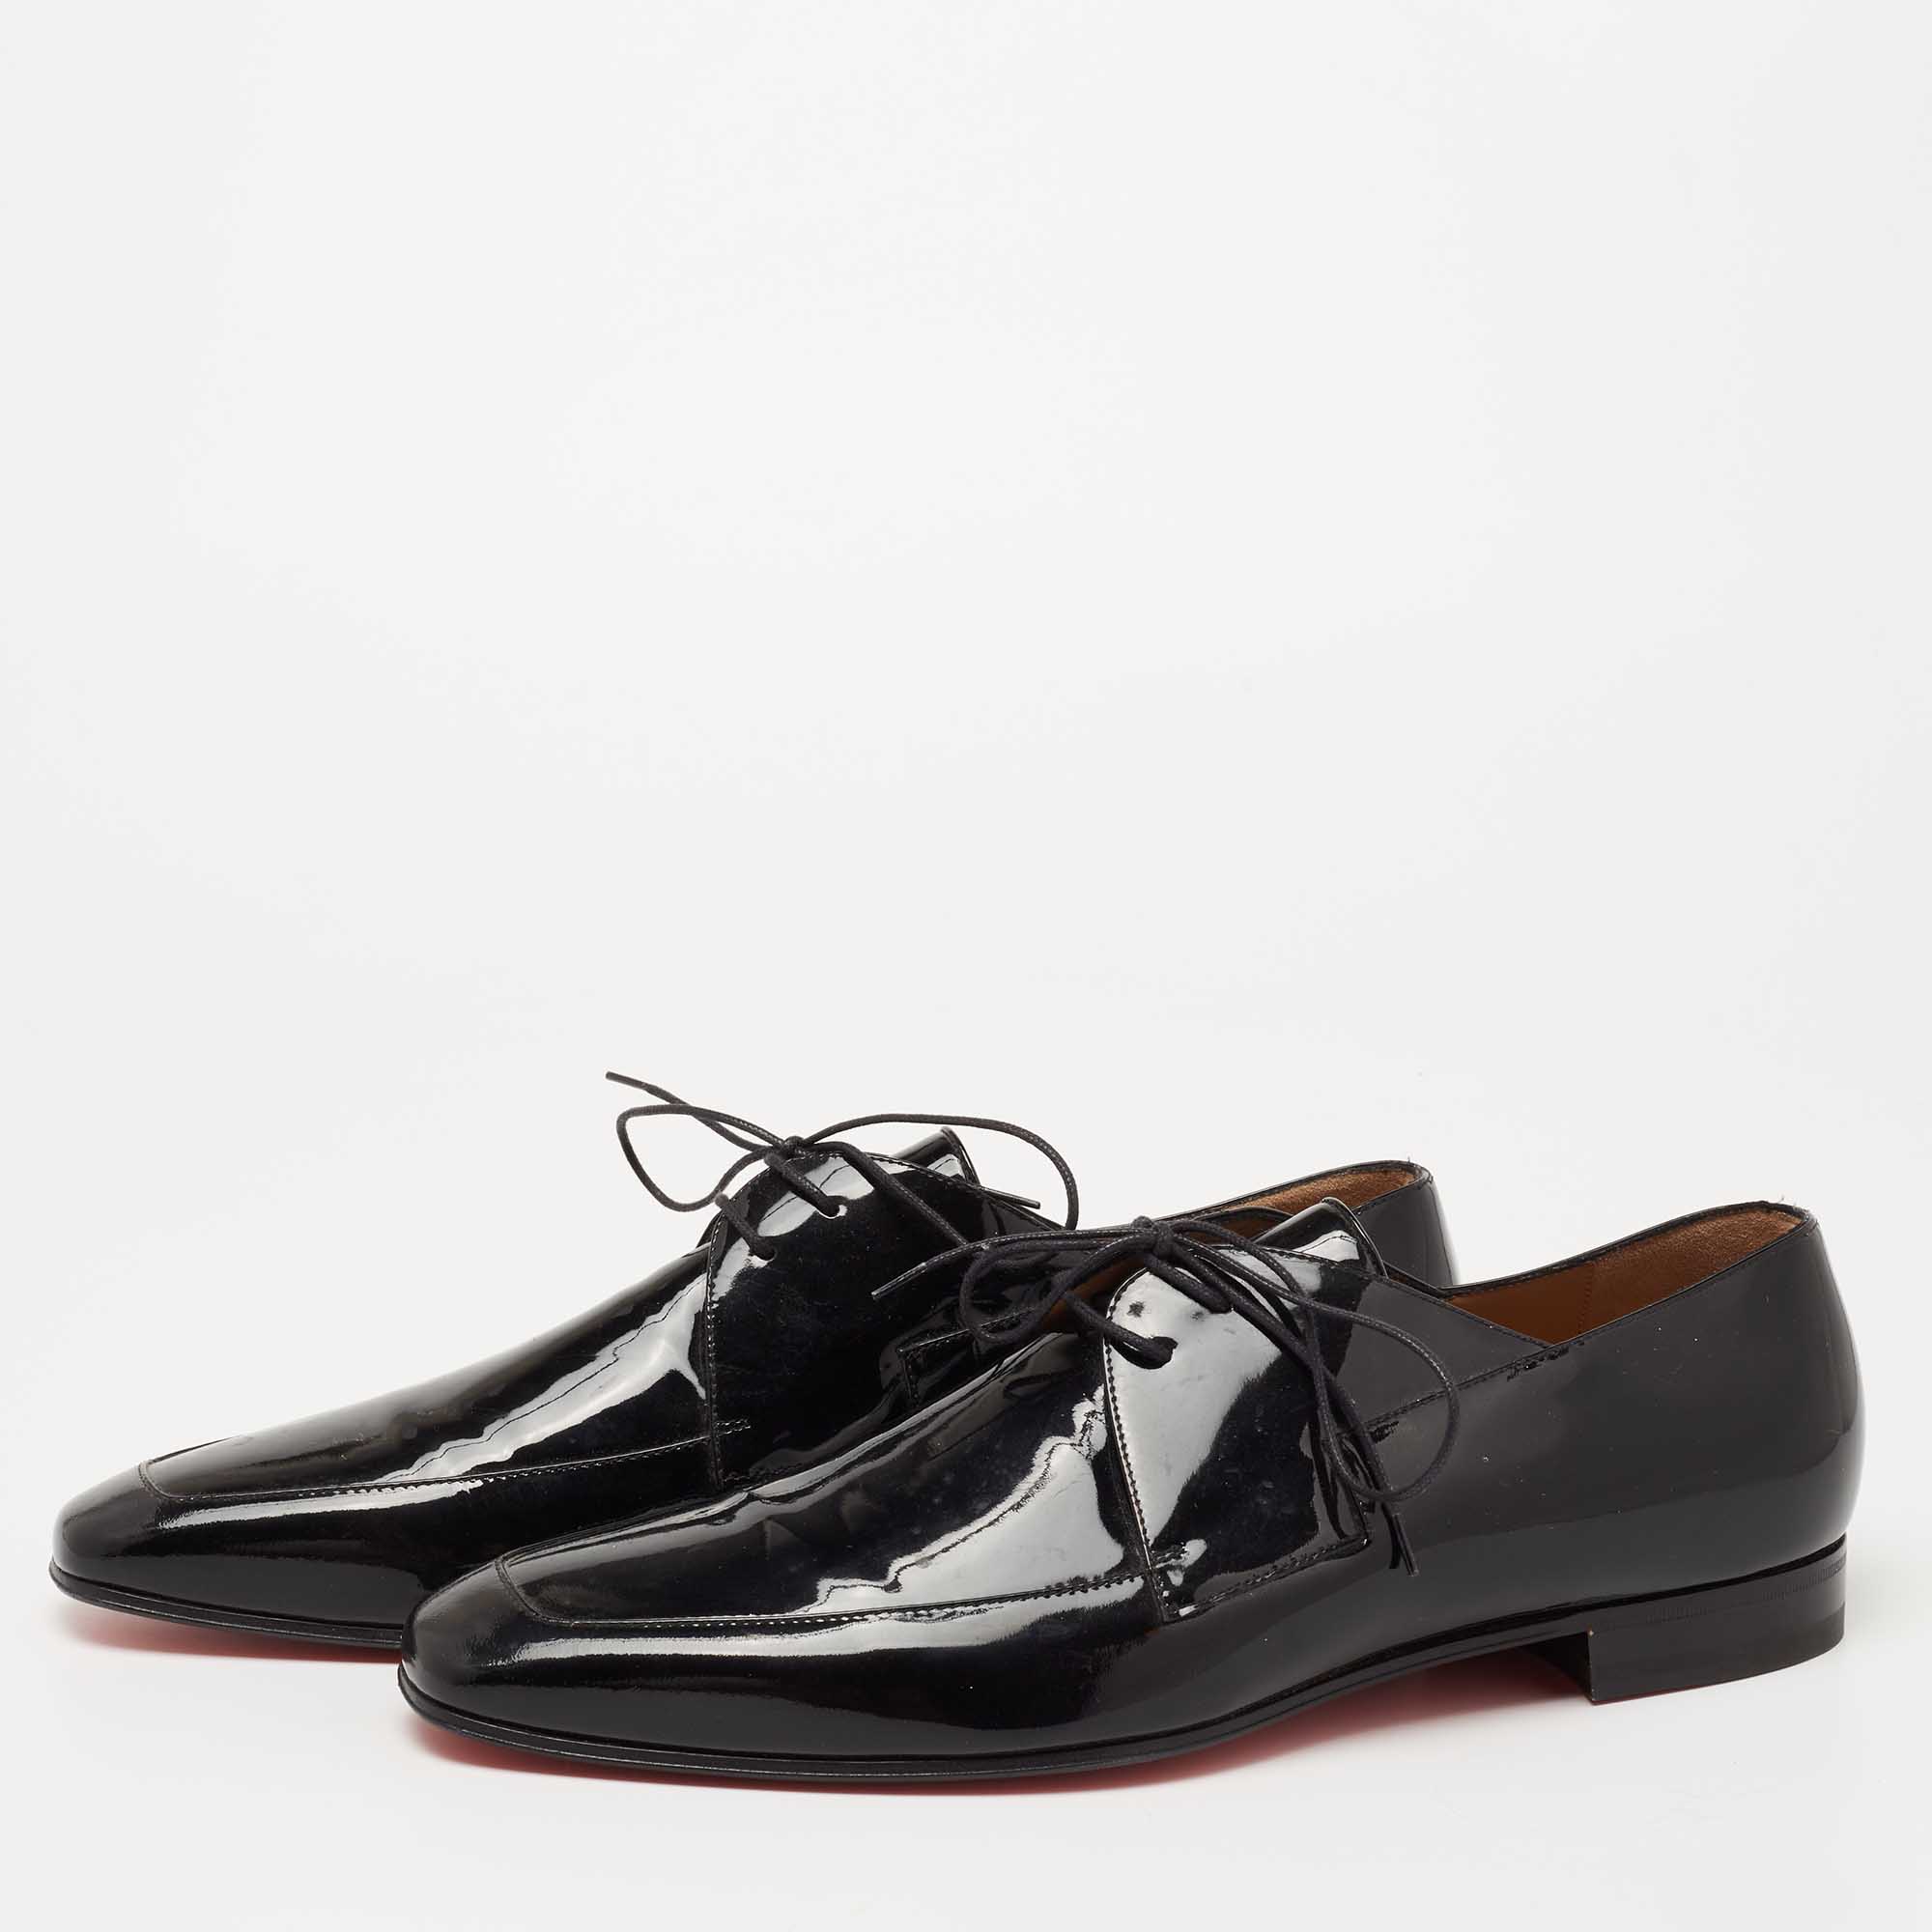 

Christian Louboutin Black Patent Leather Lace Derby Shoes Size